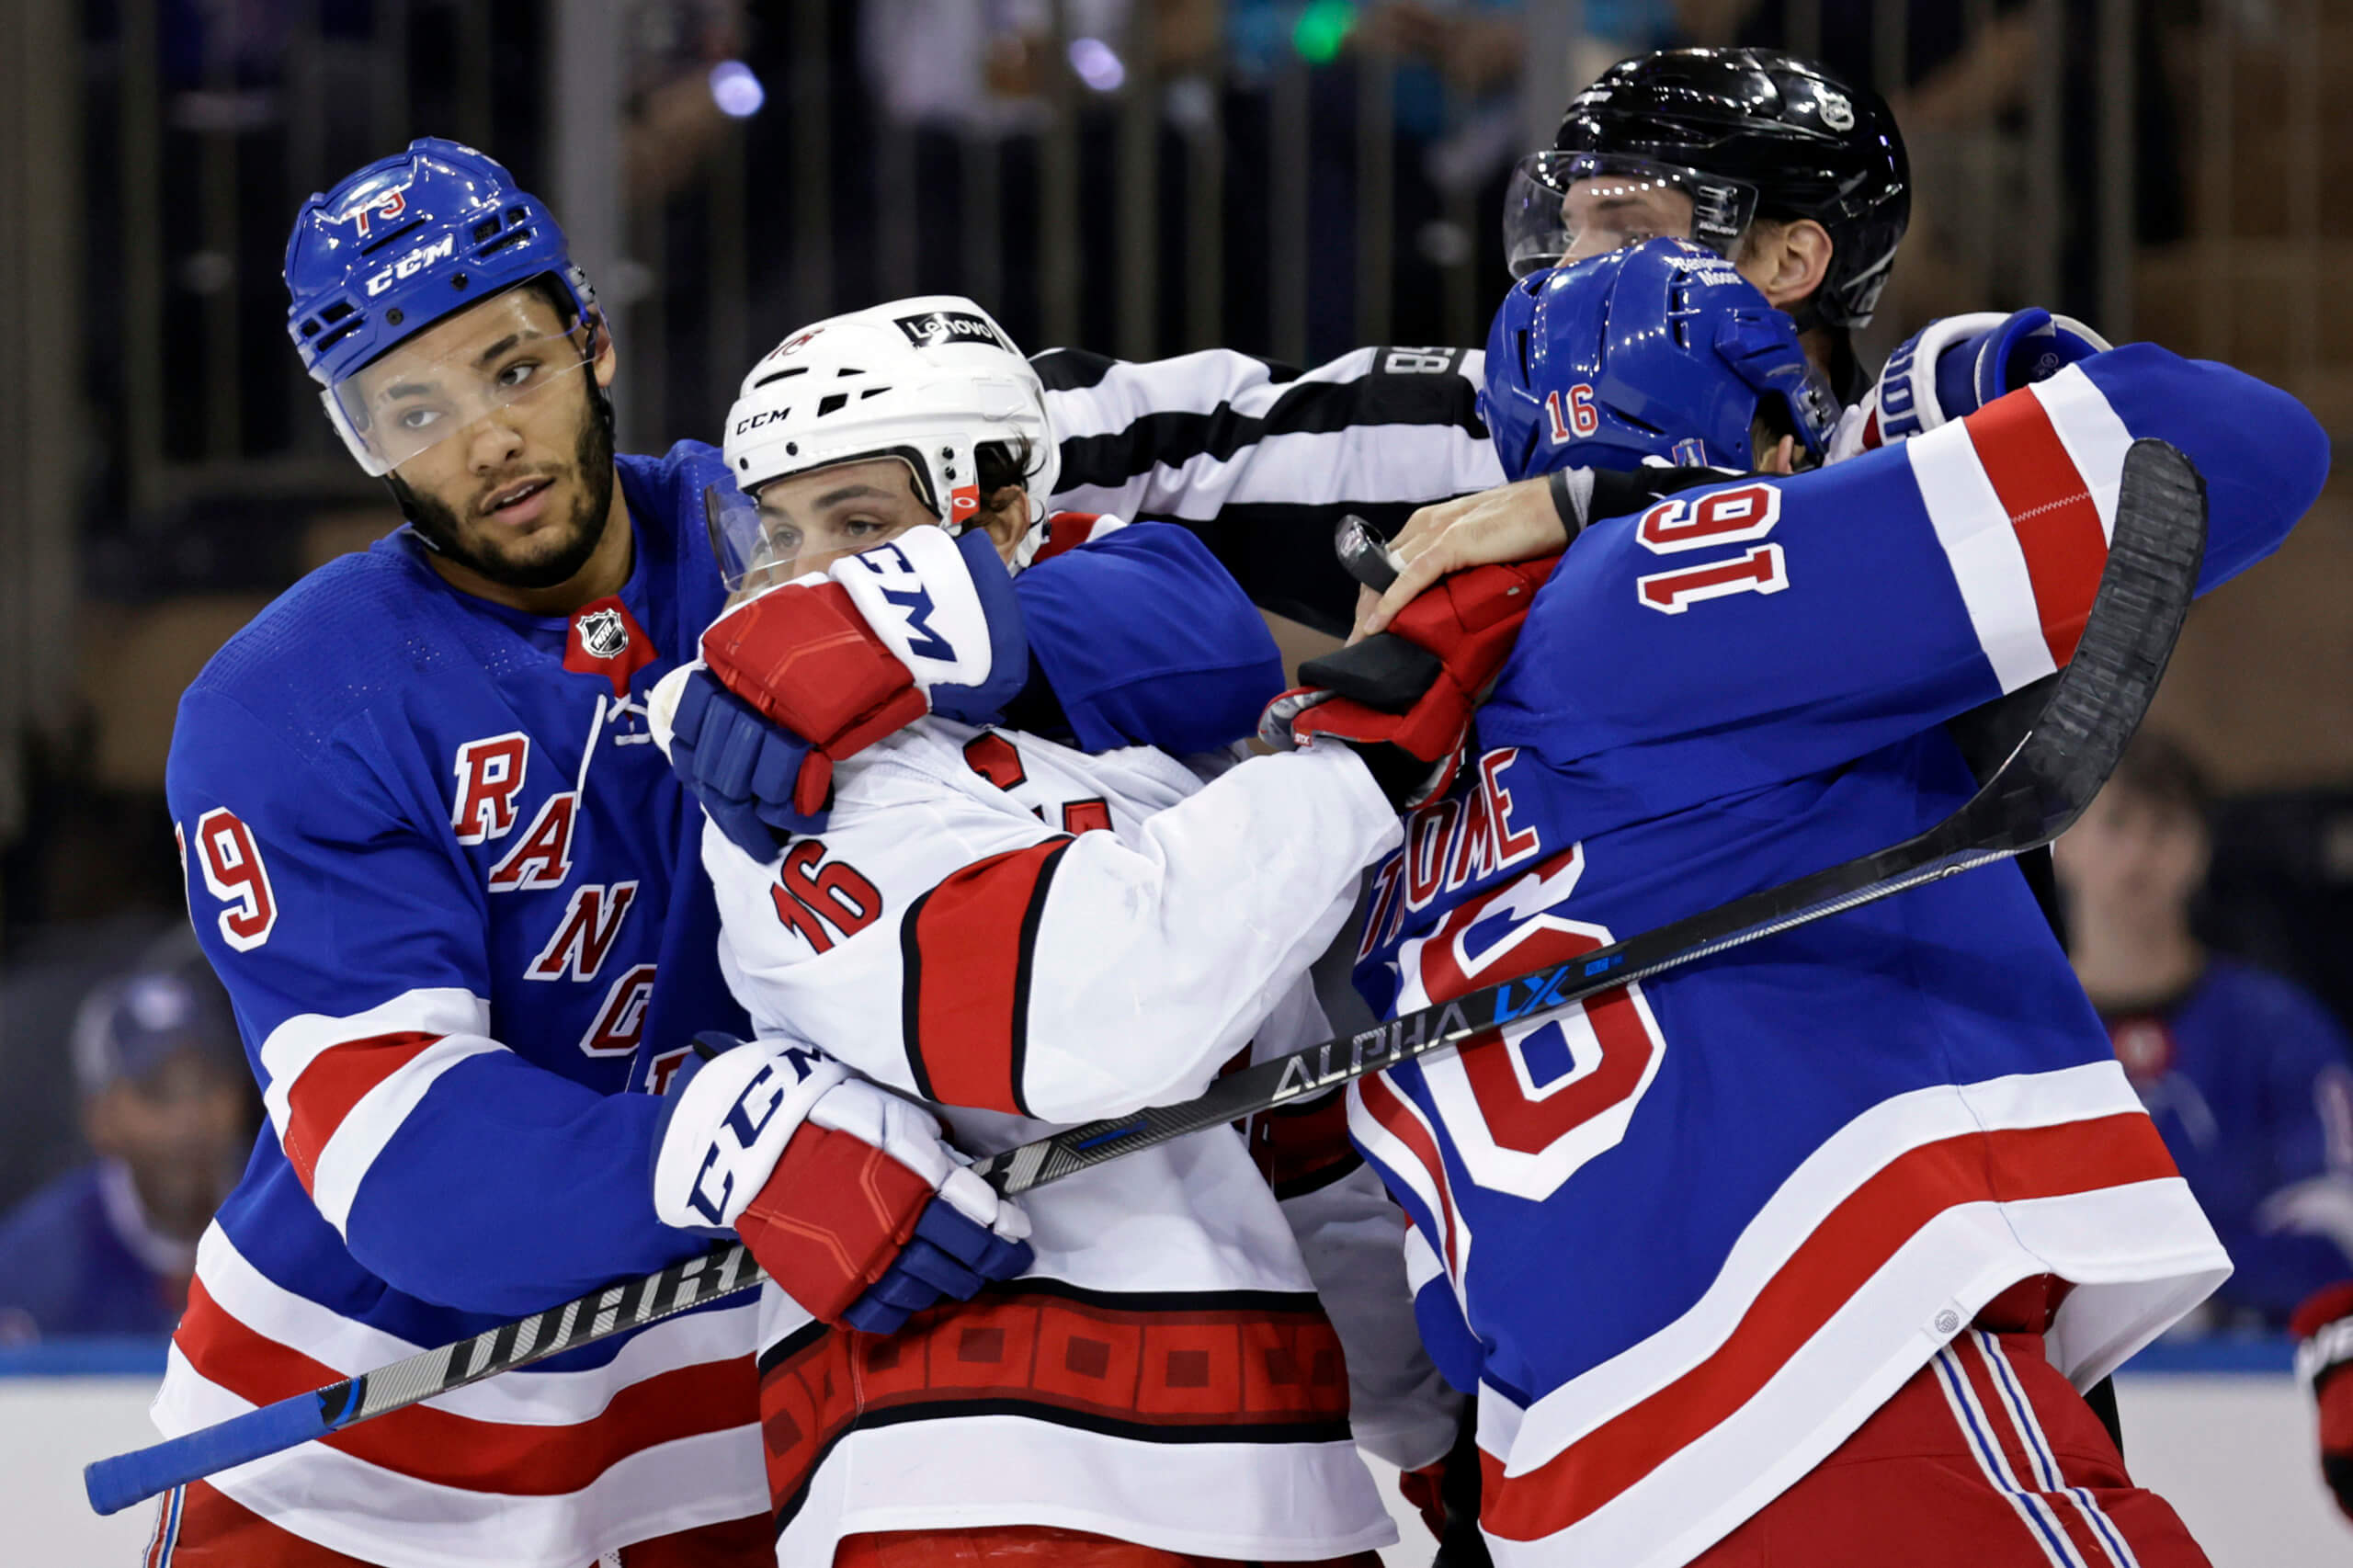 Why Devils have better NHL title shot than Rangers, Islanders